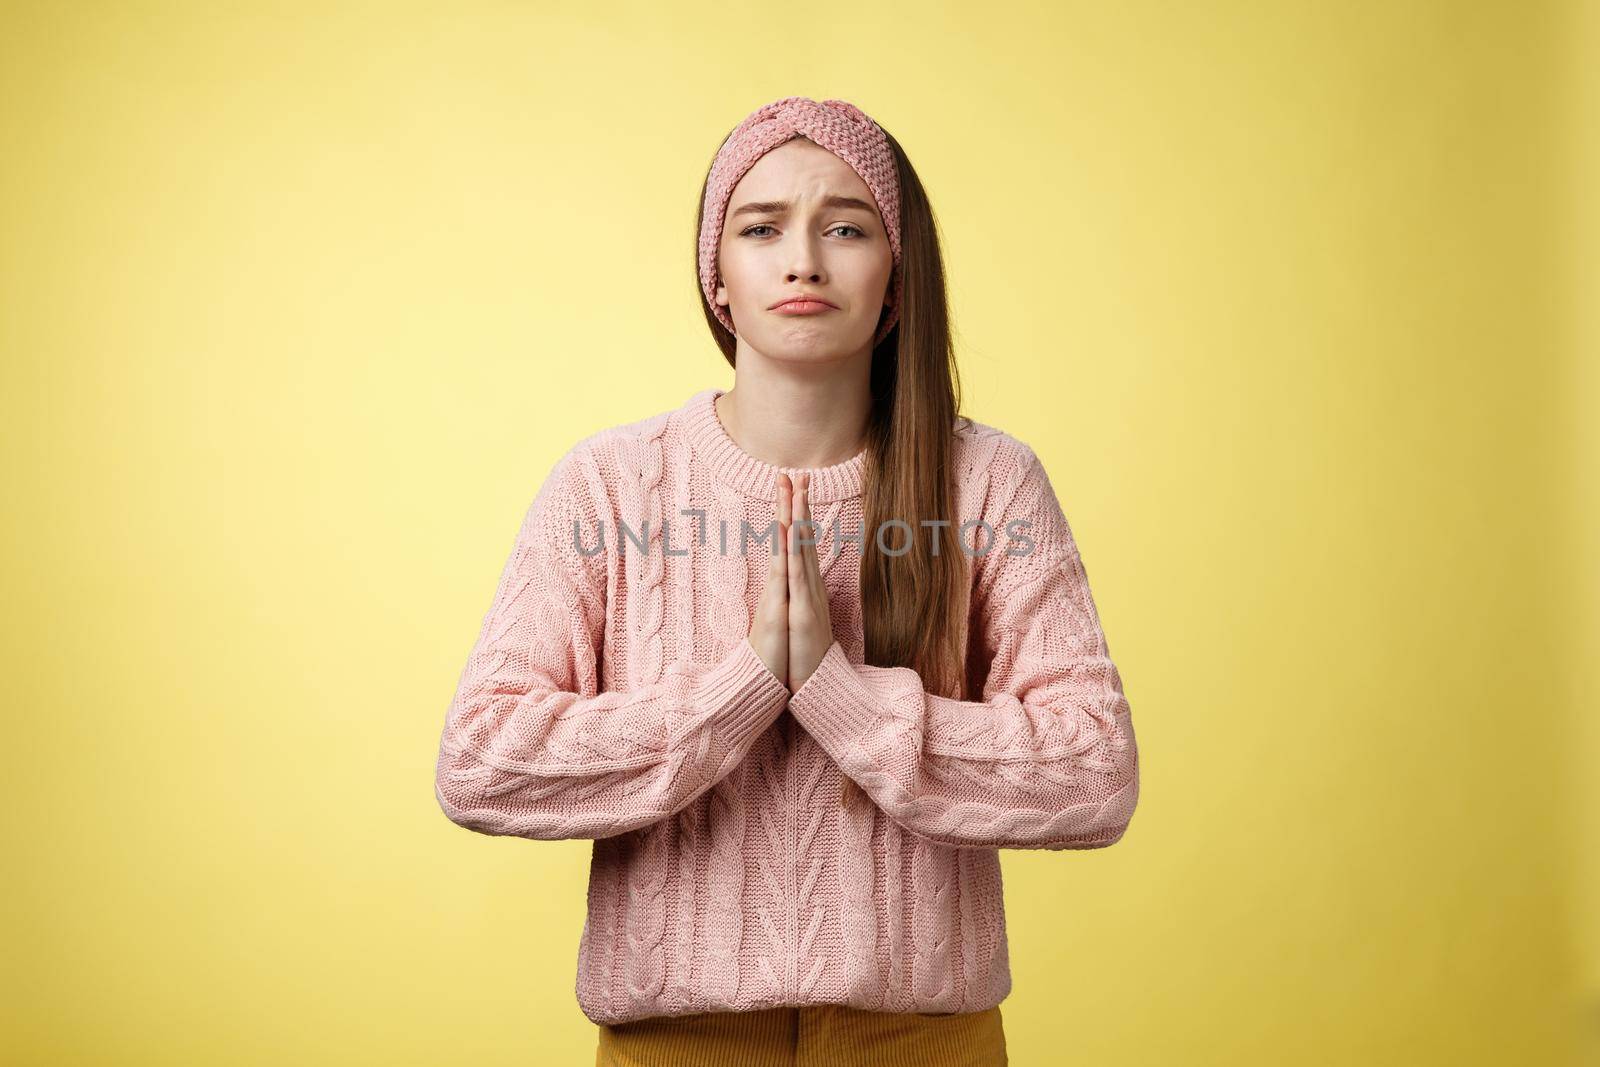 Deliberately sad girl in sweater pressing palms together in pray pouting praying for help, asking favor, begging friend lend cute dress for date, smiling silly, want something over yellow background by Benzoix